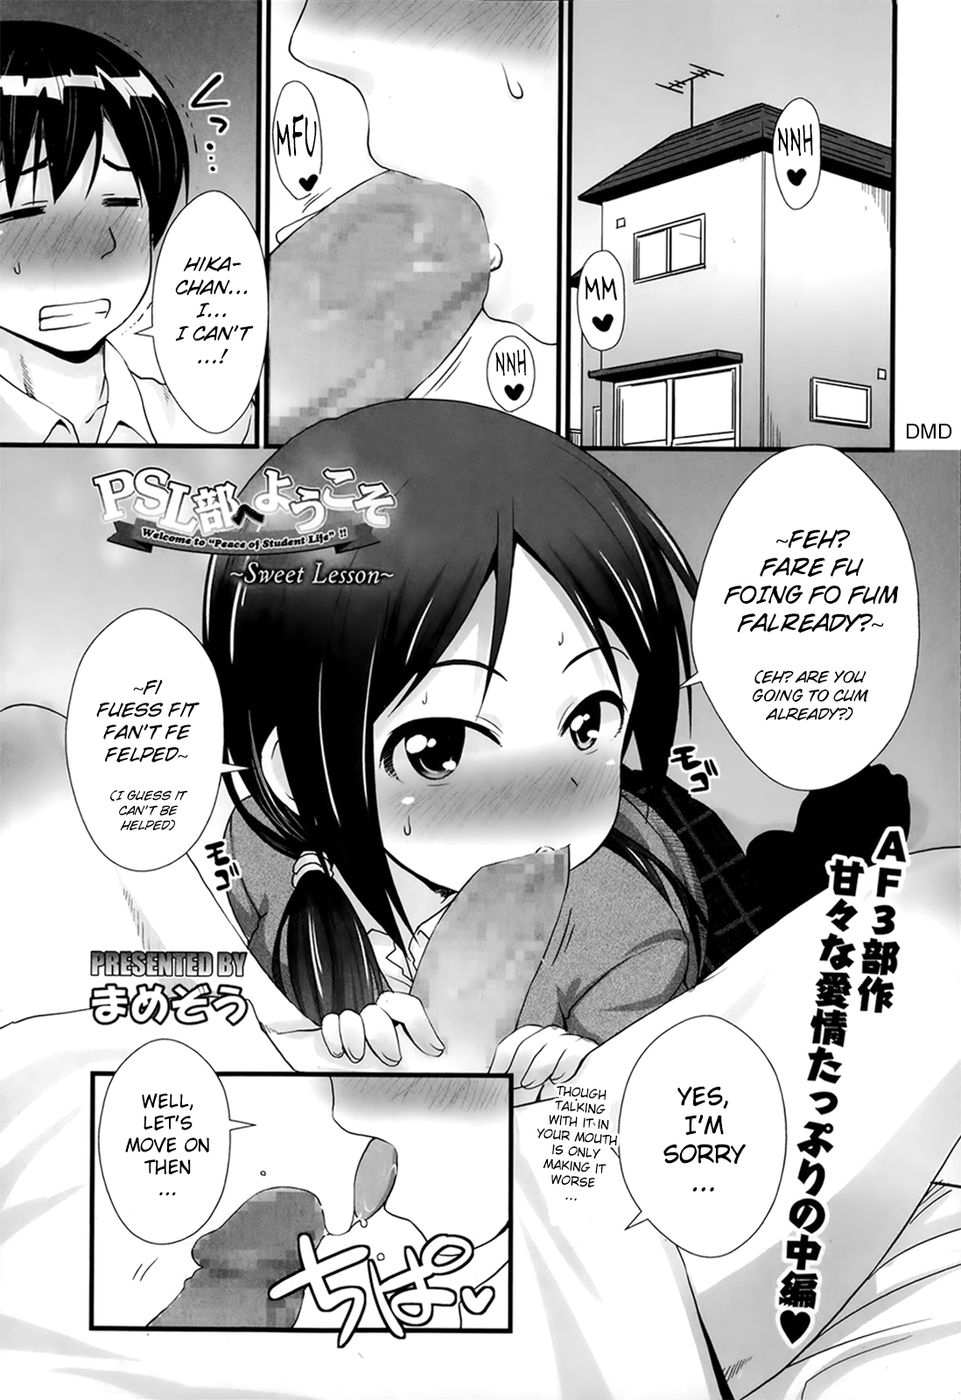 Hentai Manga Comic-Welcome to the PSL Club-Chapter 2-Sweet Lesson-1